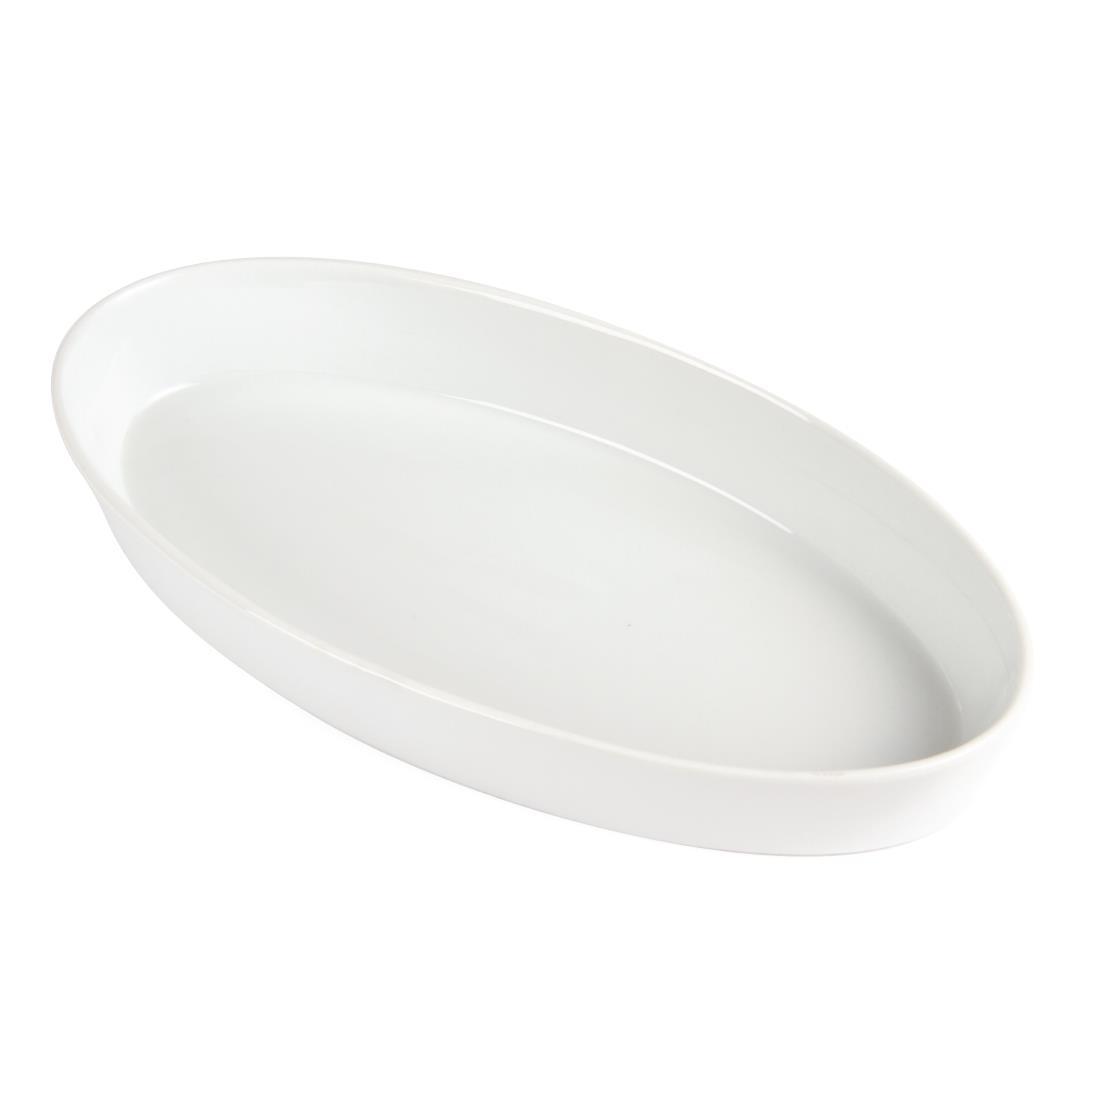 Olympia Whiteware Oval Sole Dishes 283 x 152mm (Pack of 6) - W409  - 4